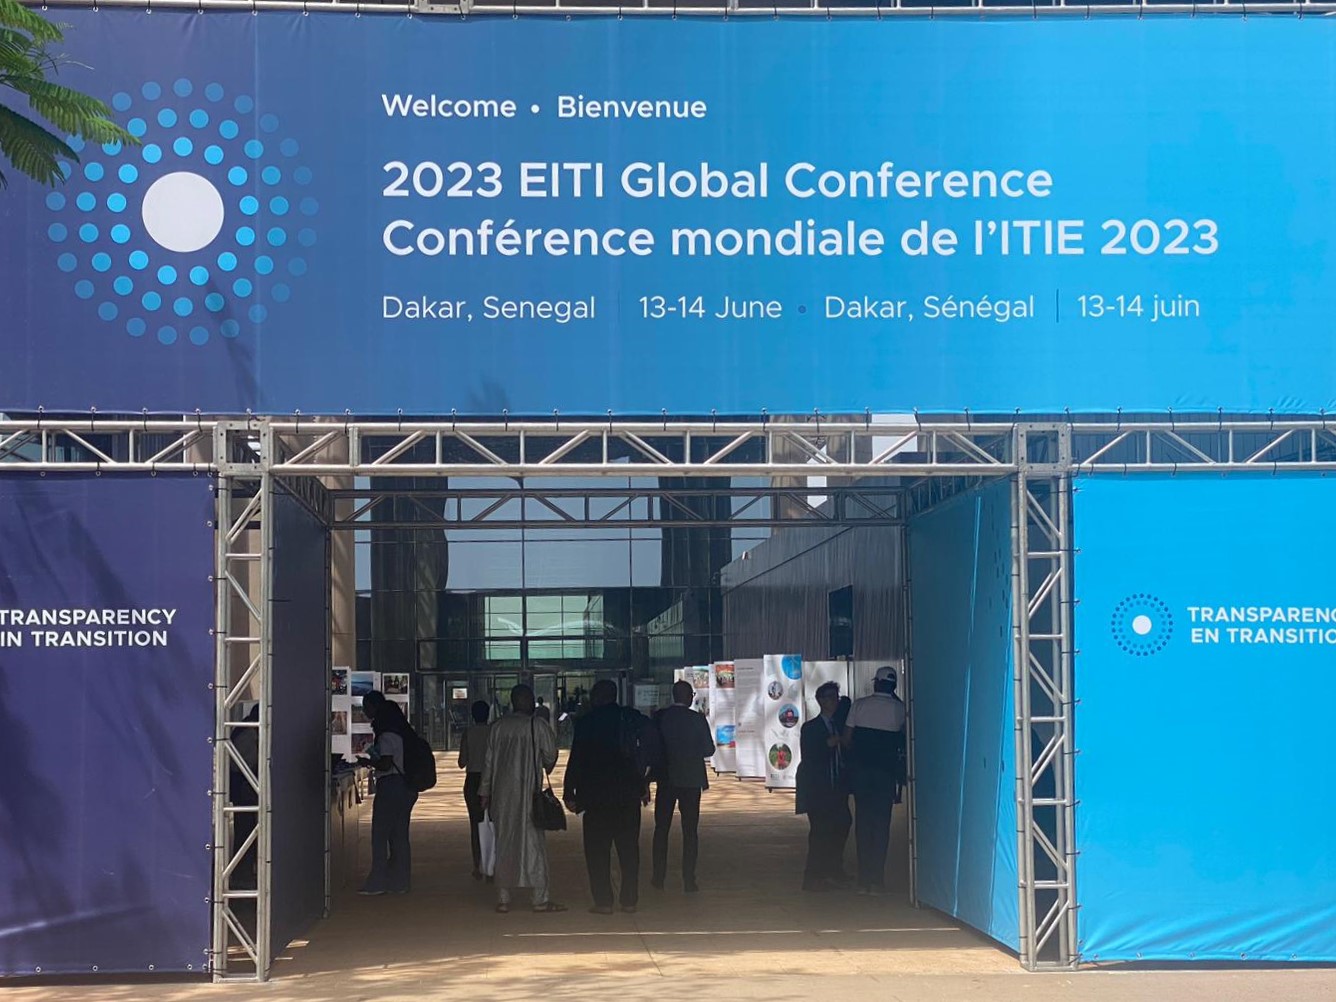 EITI Global Conference Entrance